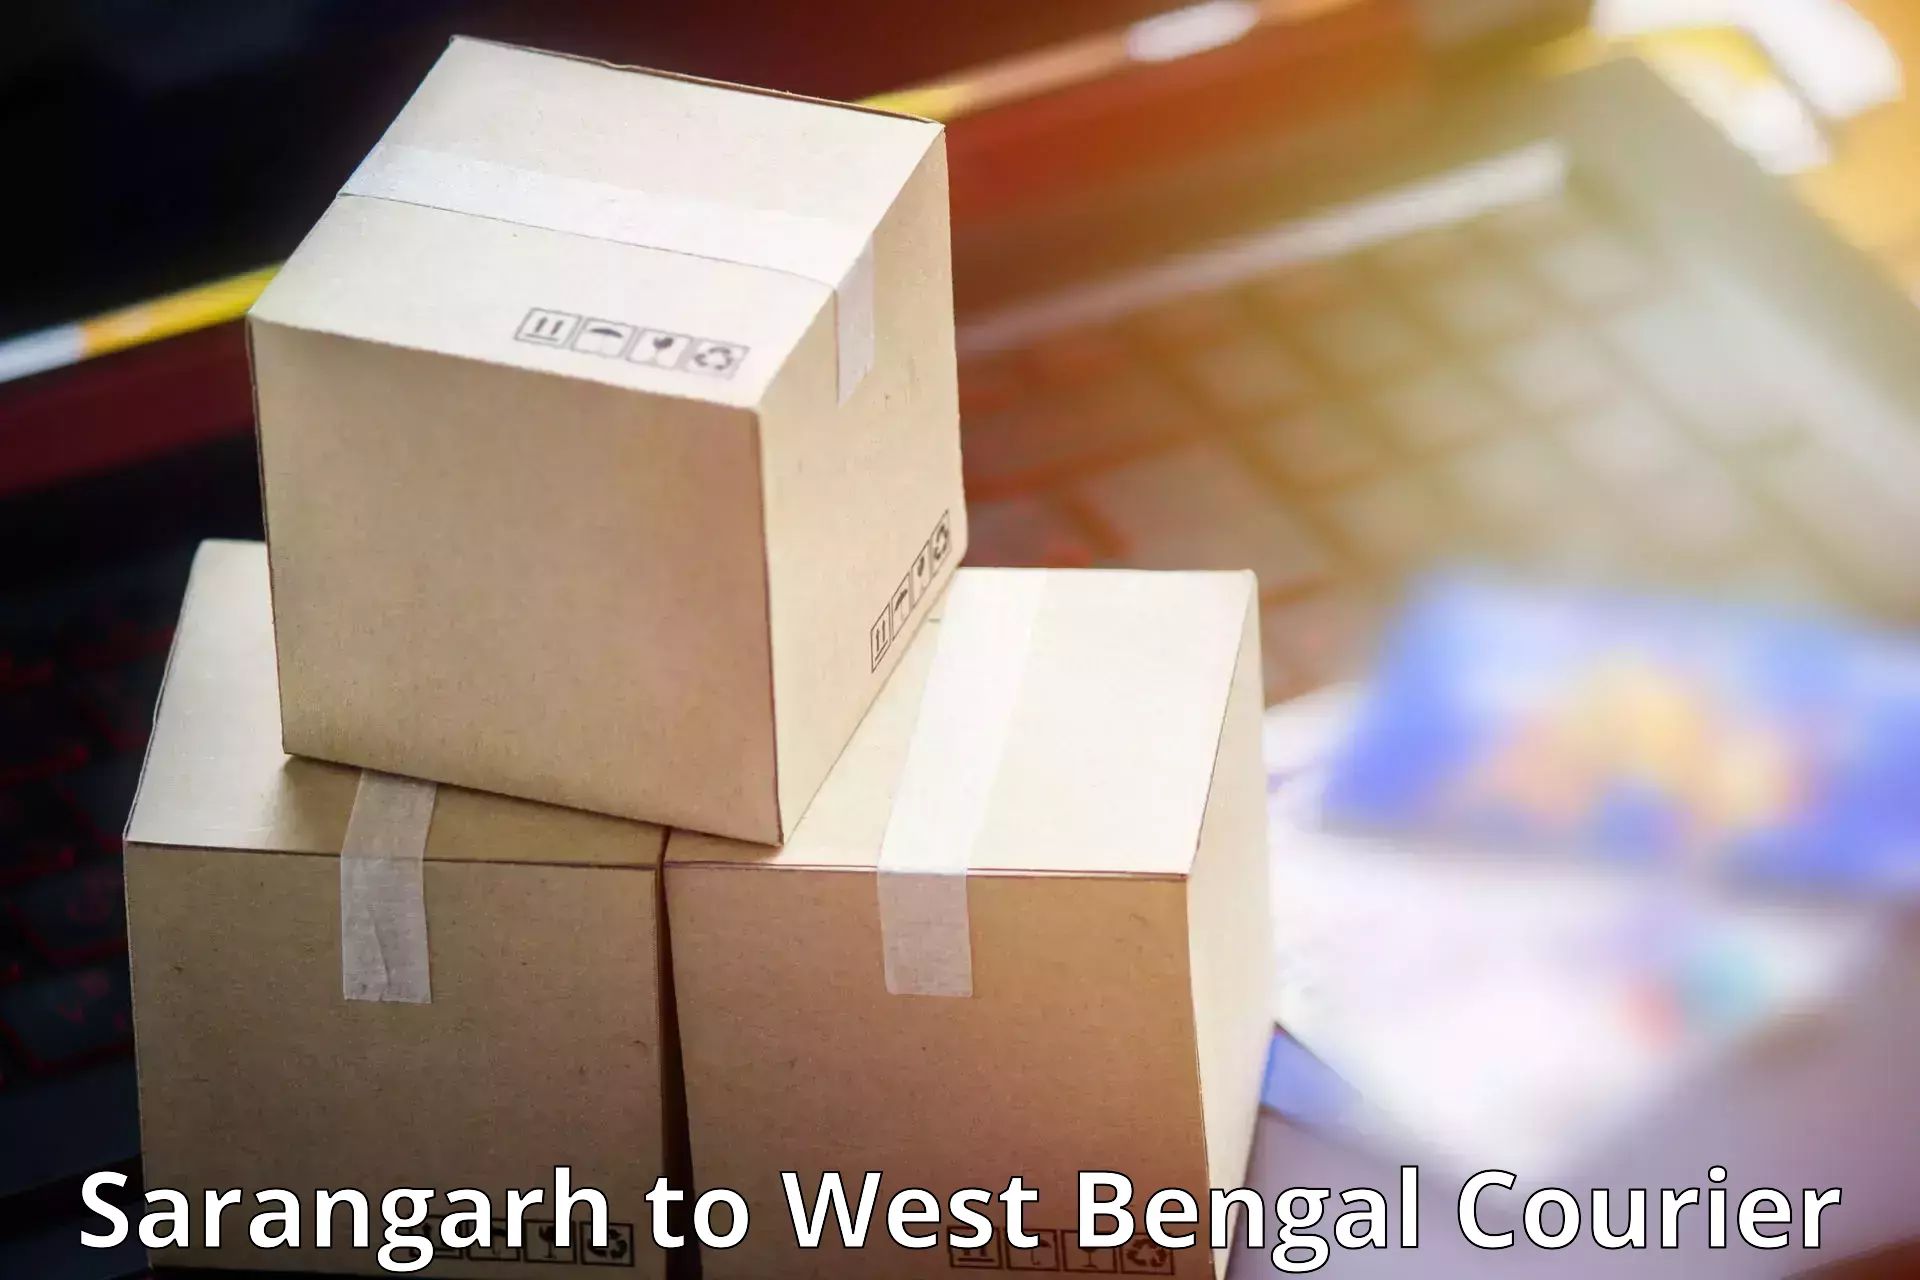 Parcel delivery automation Sarangarh to Gourbathan